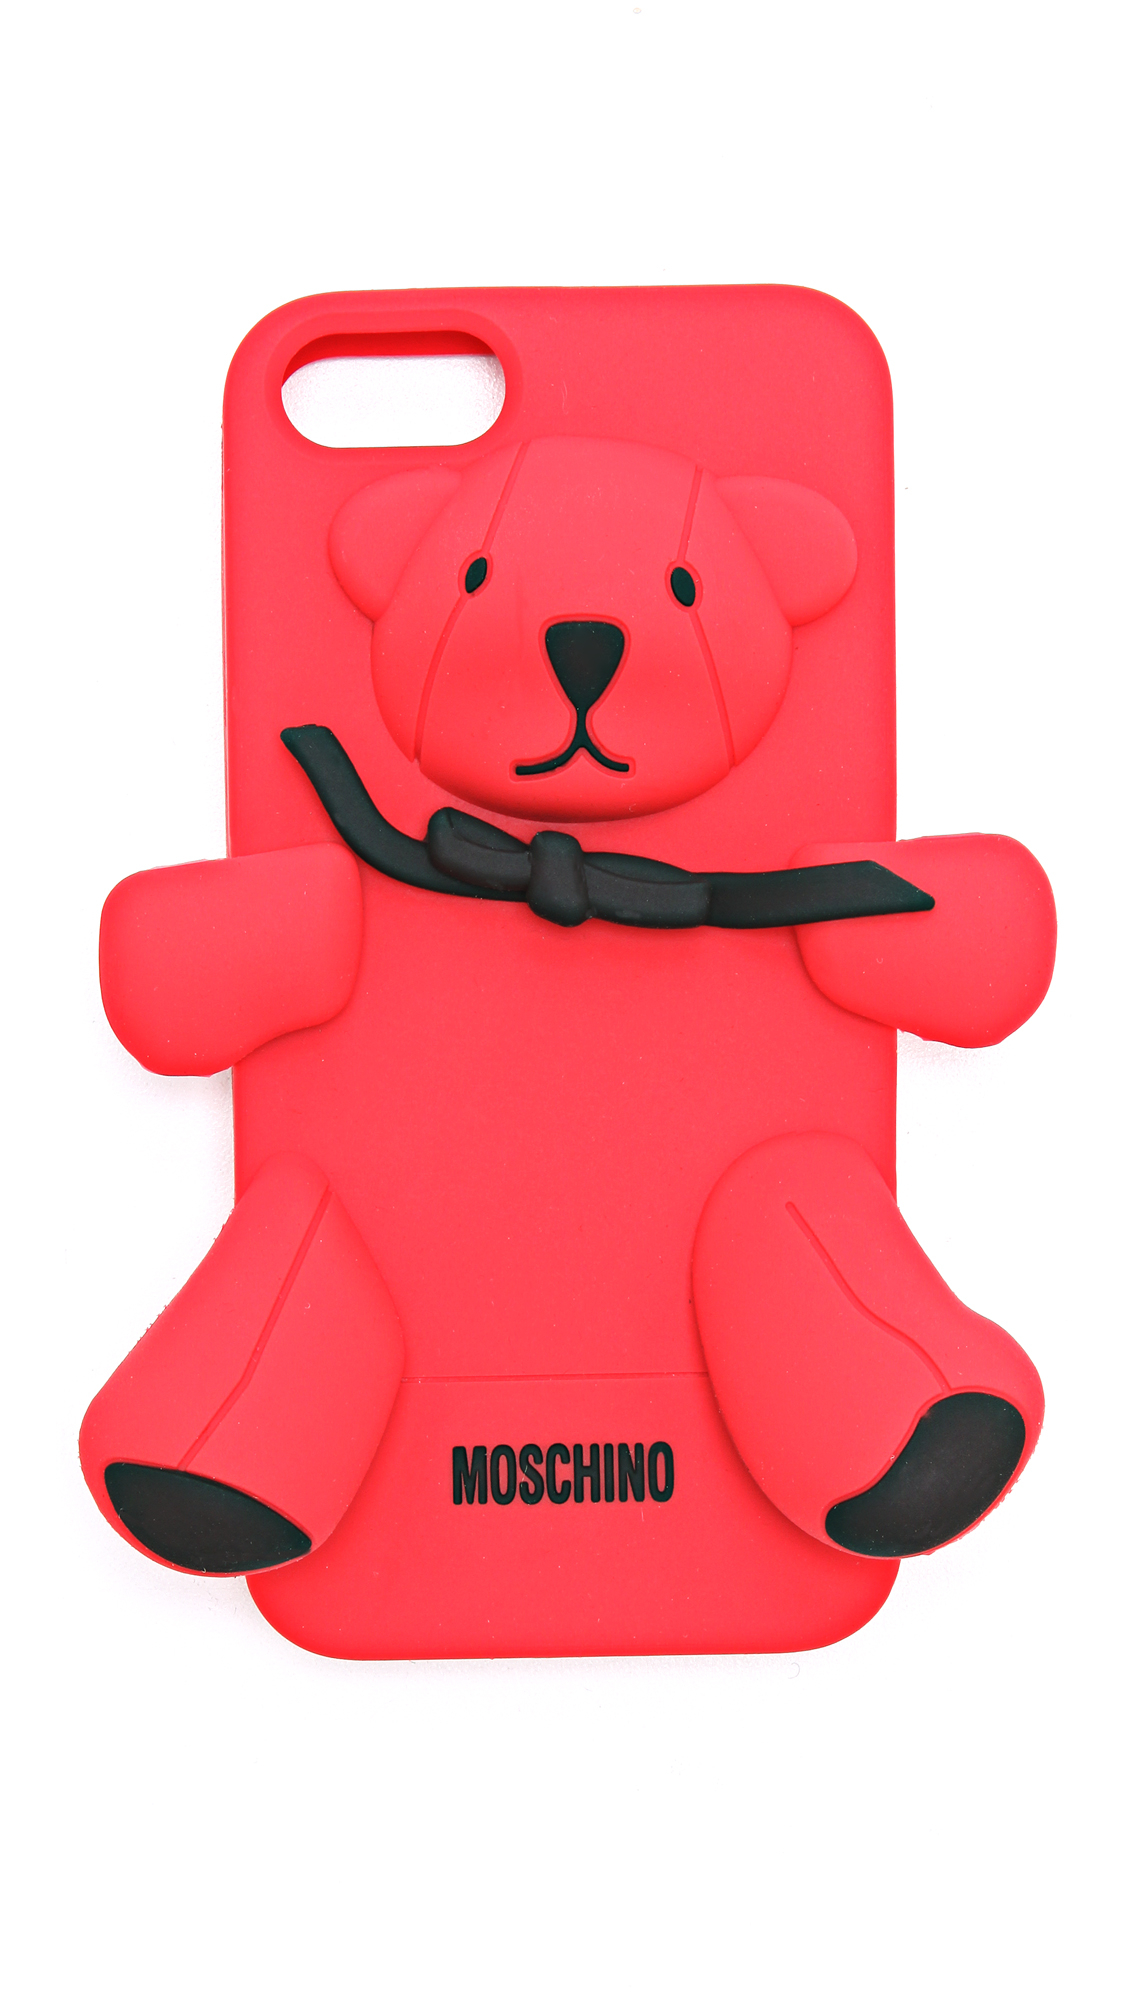 Lyst - Moschino Bear Iphone 5 Case in Red